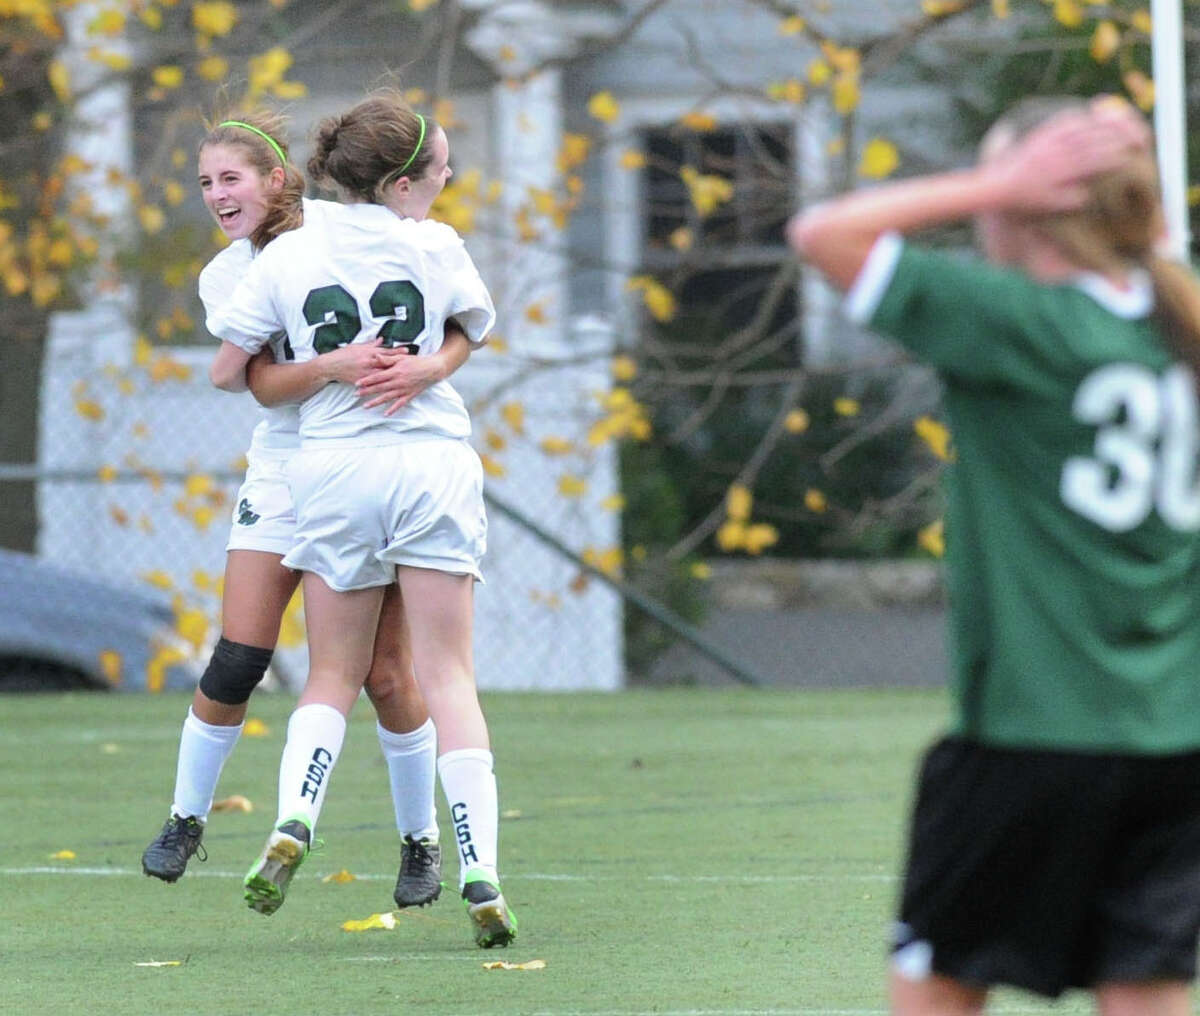 Convent of the Sacred Heart's Tracey Hagan, left, is congratulated by teammate, Erin Cleary (#22), after Hagan got what turned out to be the winning goal during the FAA girls soccer championship match between Greenwich Academy and Convent of the Sacred Heart at Greenwich Academy, Conn., Friday, Nov. 7, 2014. Convent won the championship by a score of 3-2 with Hagan's deciding goal with 2:13 left in overtime.